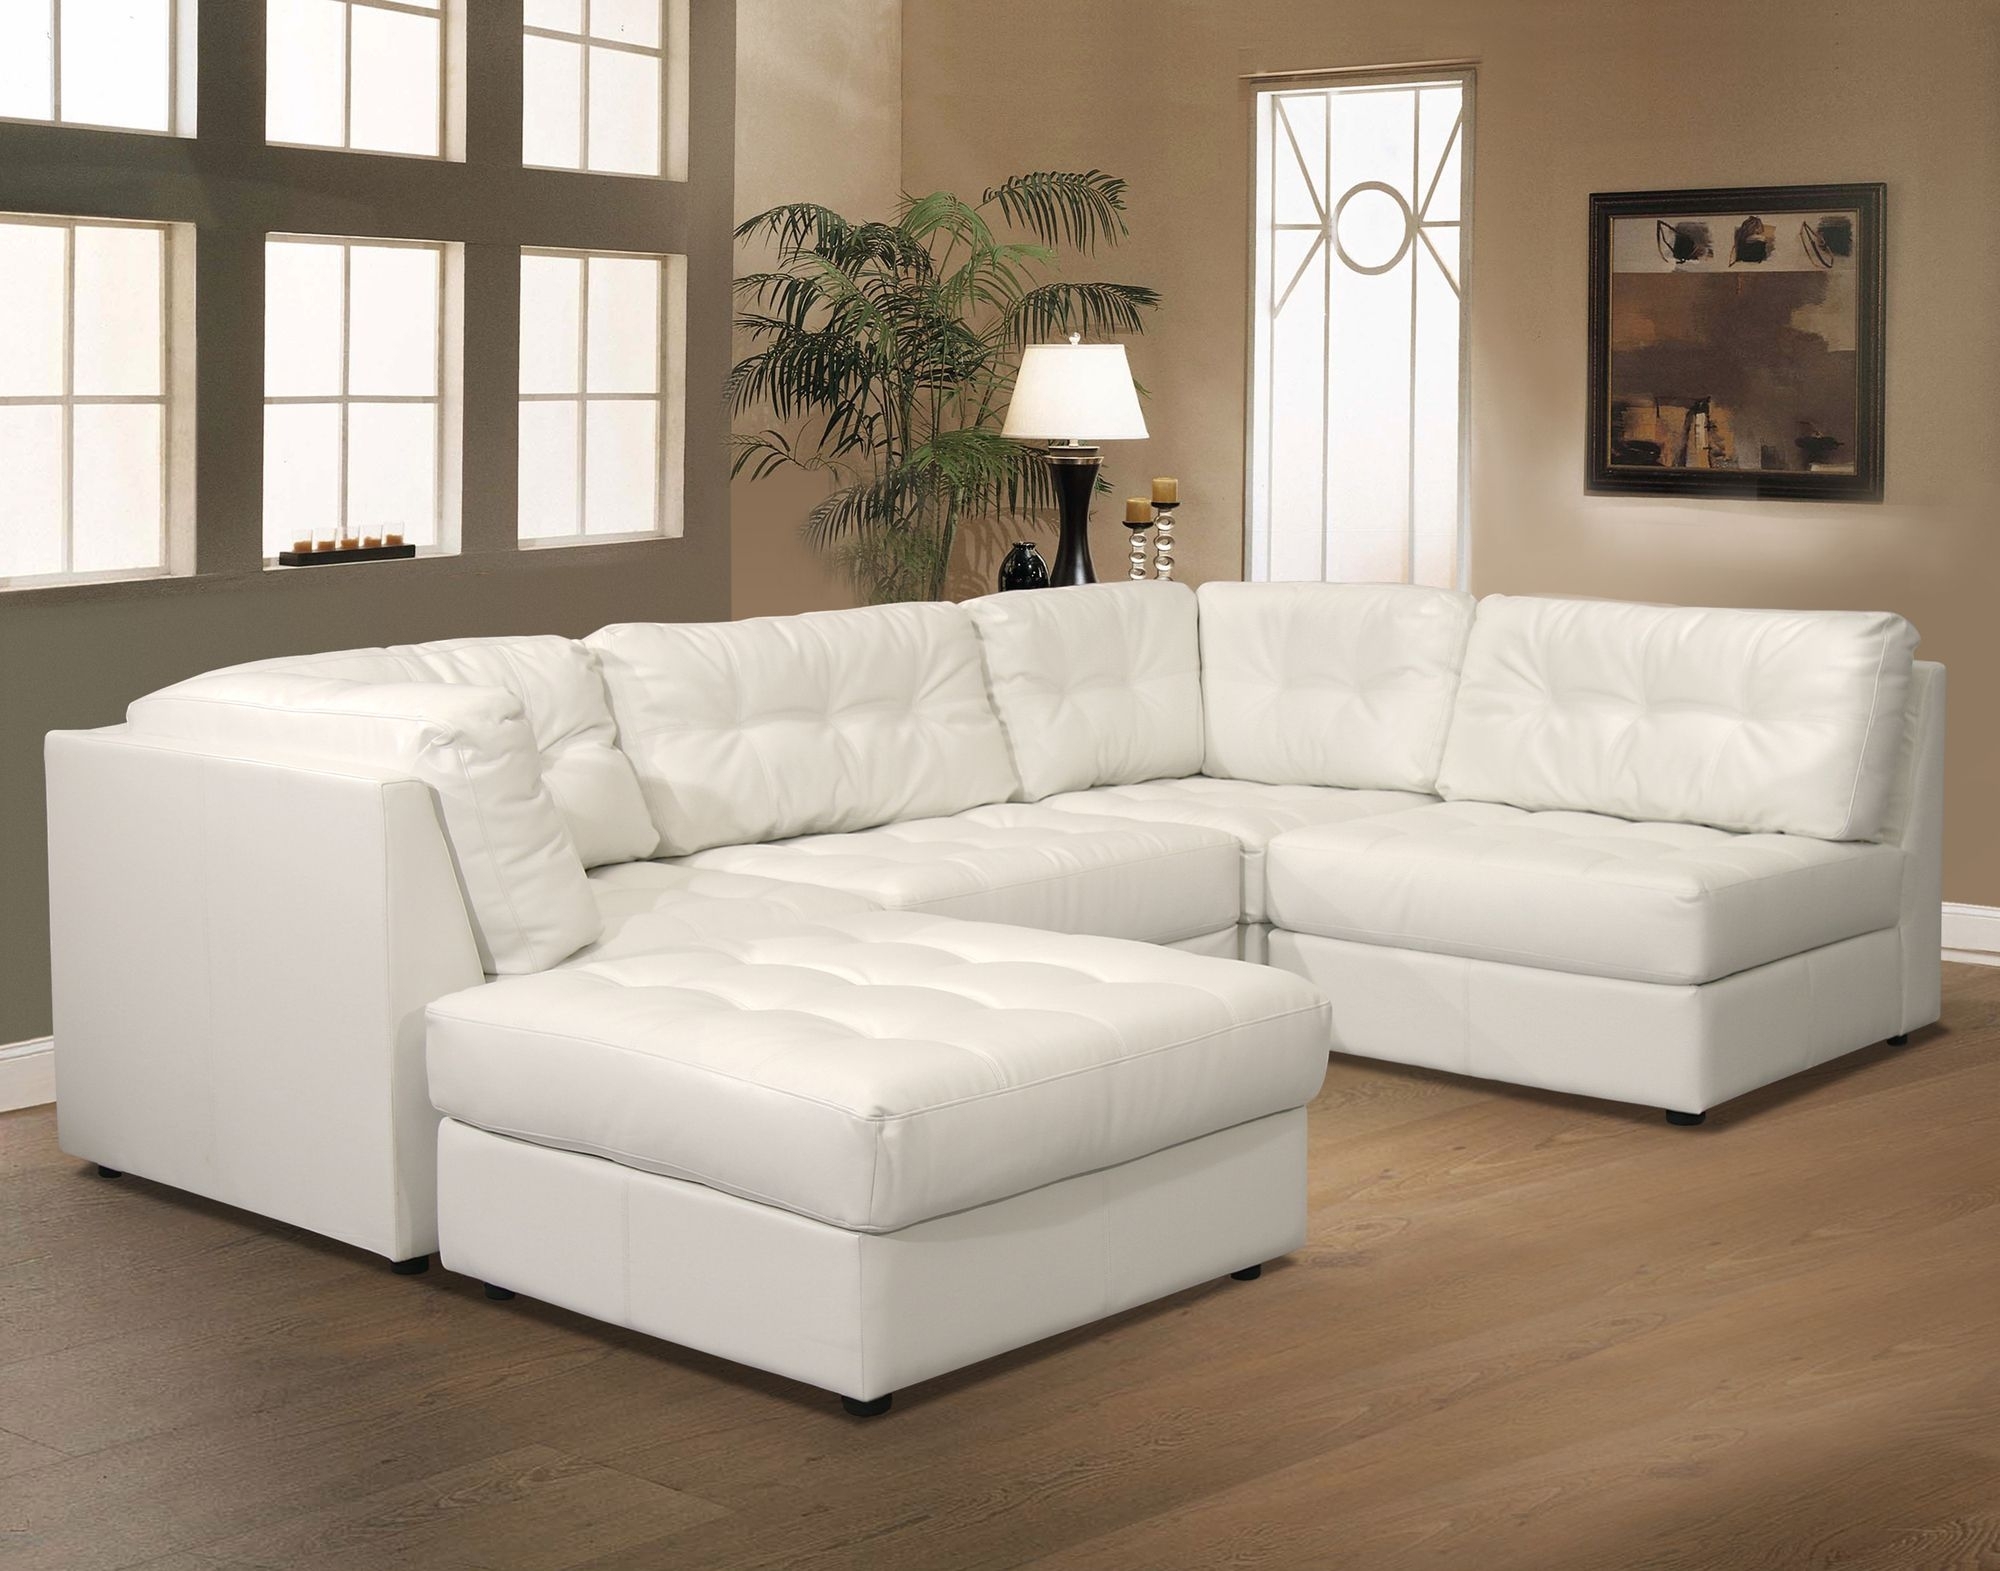 White Leather Sectional Sofa - best collections ever